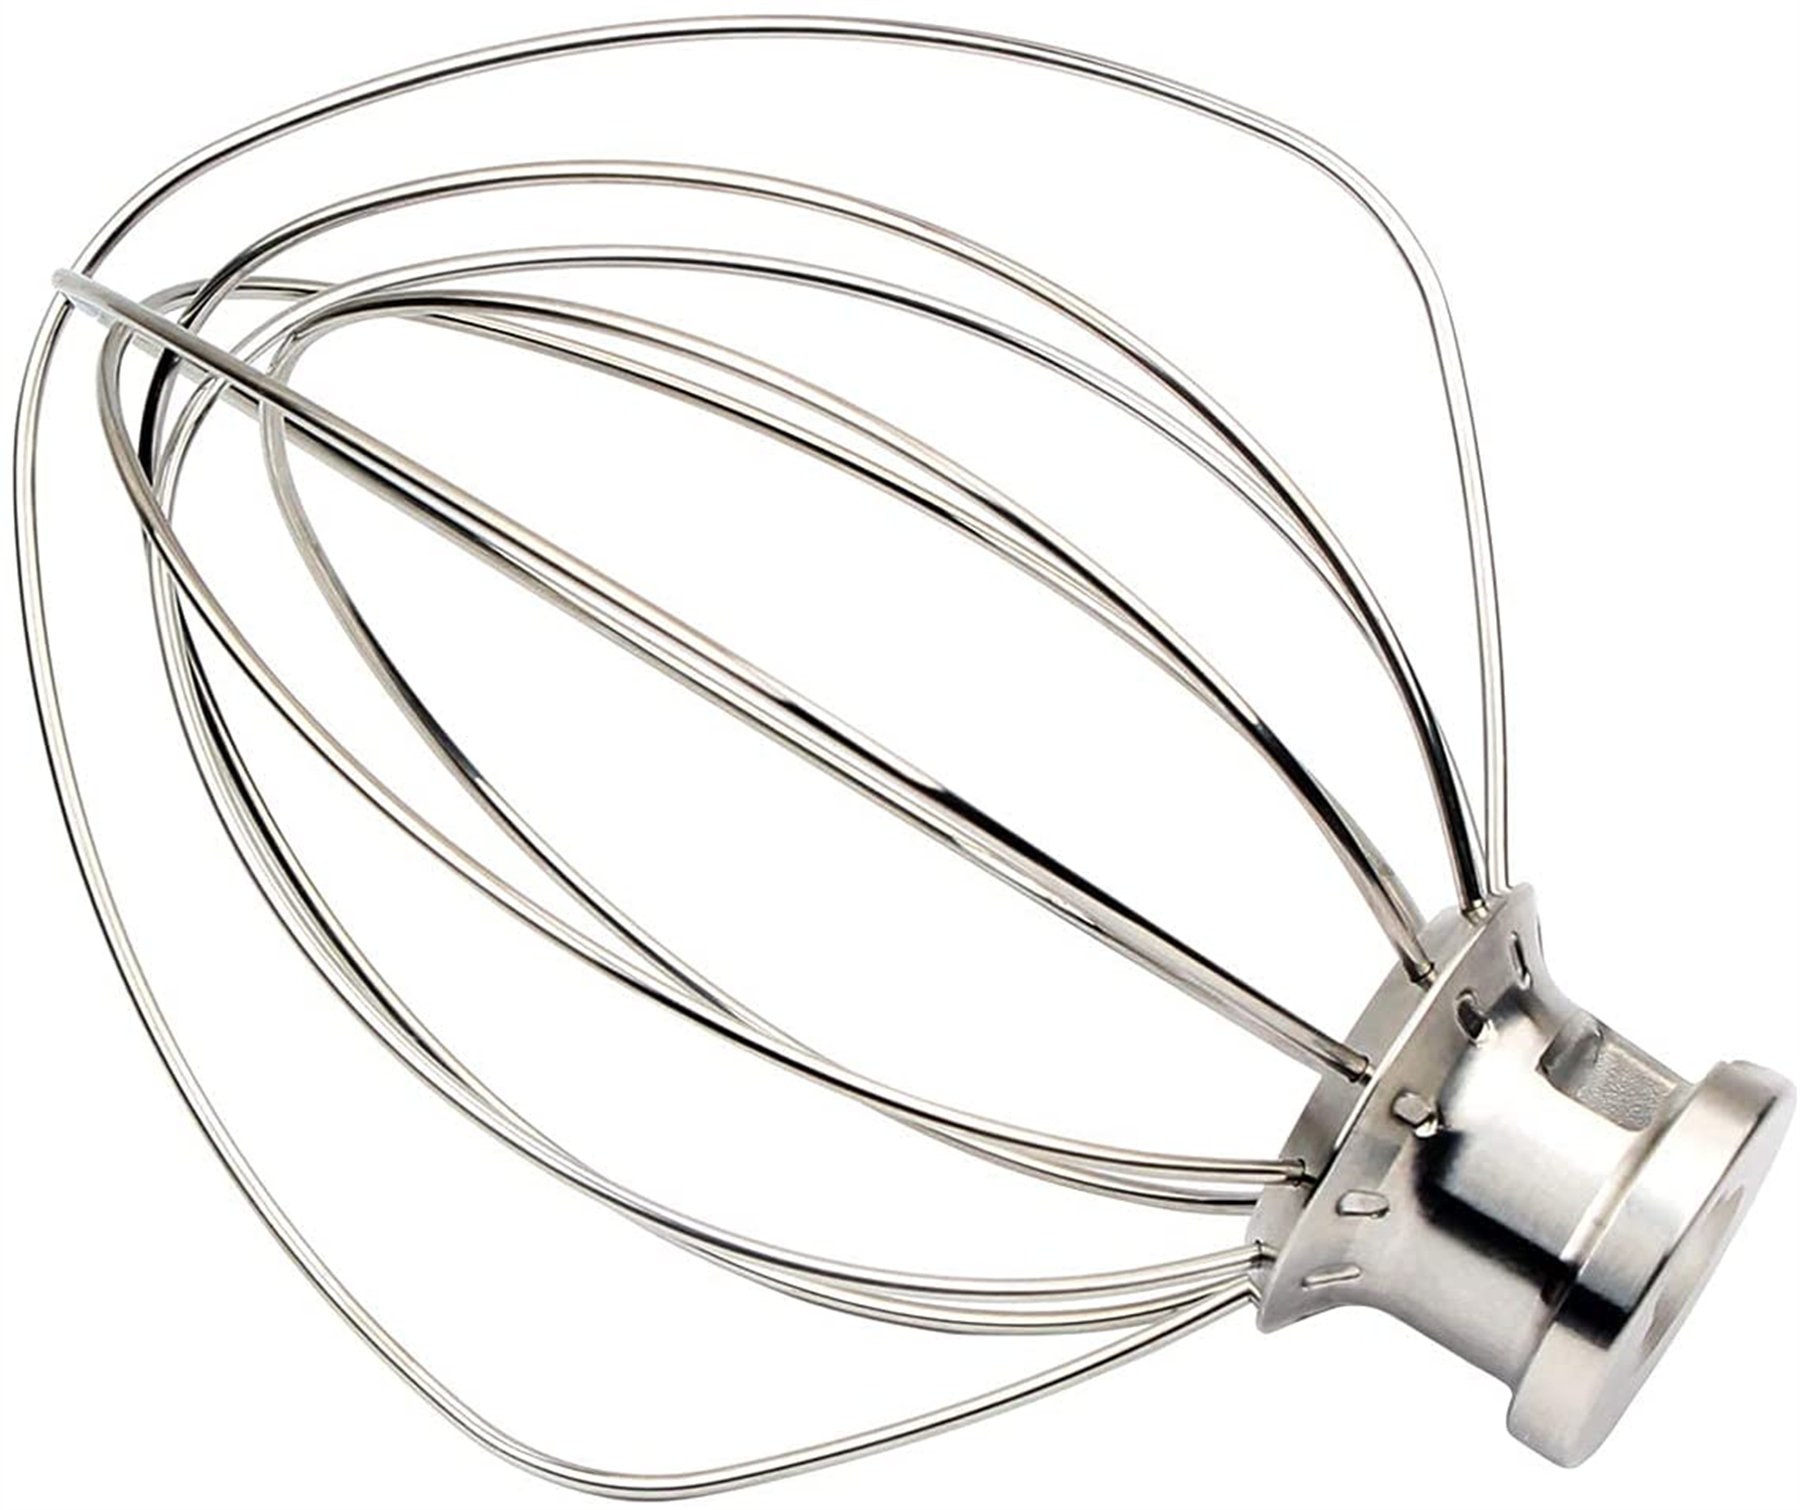 All 304 Stainless Steel Whis,Cakes Mayonnaise Whisk,Egg Cream Stirrer Dishwasher Washable,K45WW 6-Wire Whip Attachment for KitchenAid Tilt-Head Stand Mixer 